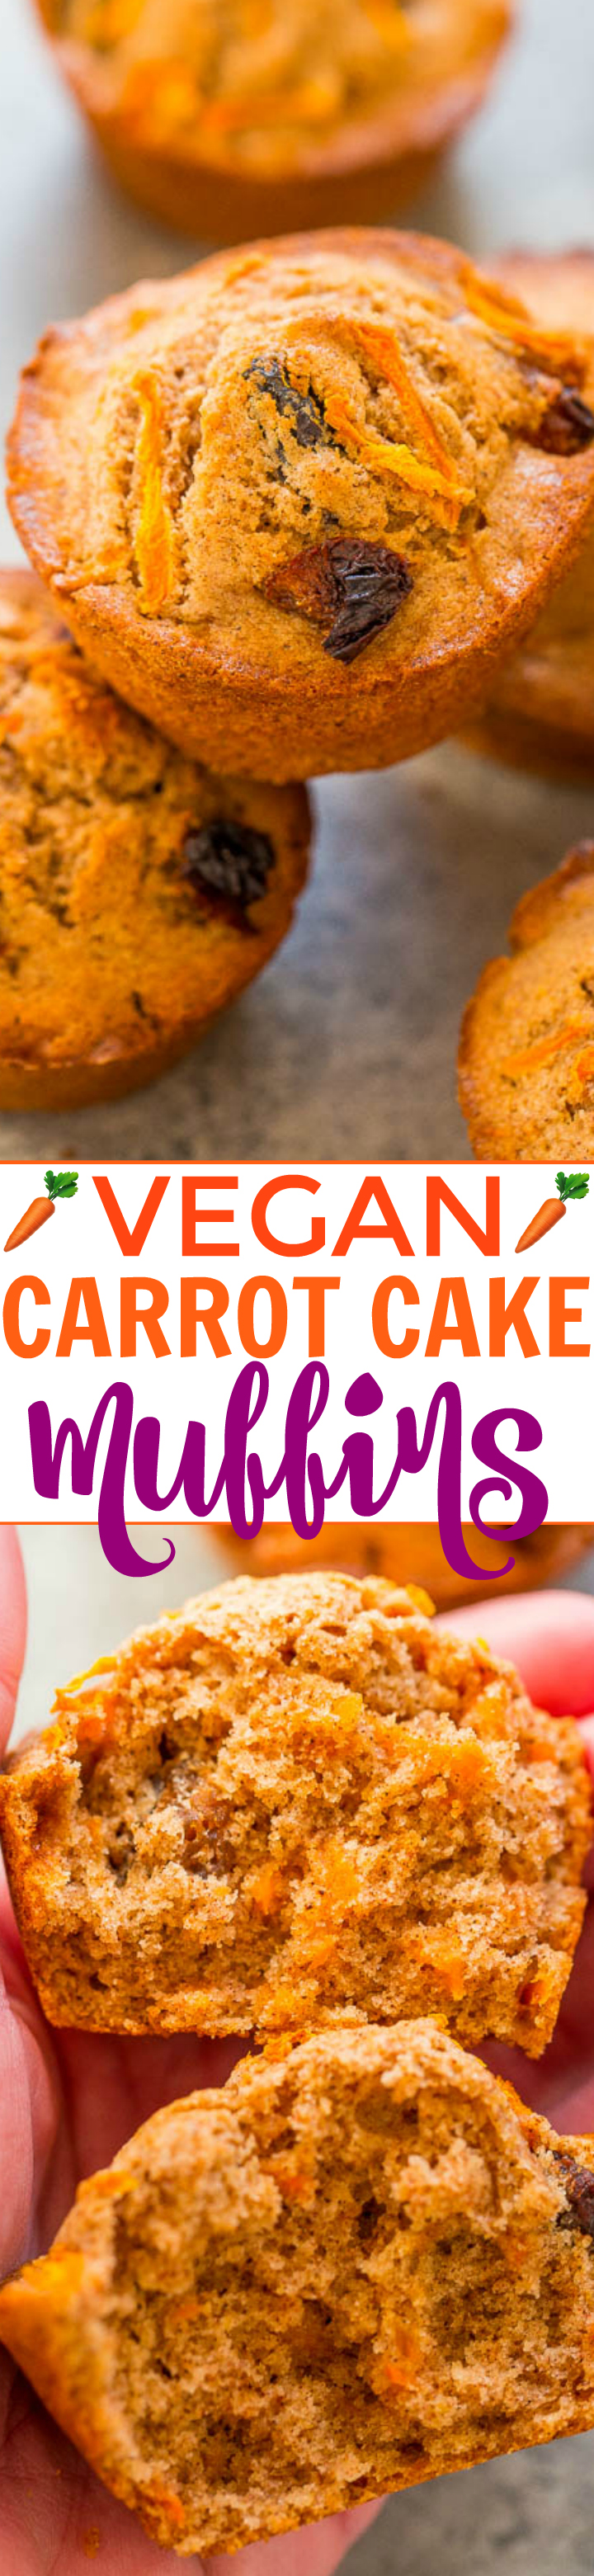 Vegan Carrot Cake Muffins - Fast, EASY, accidentally vegan muffins that are bursting with authentic carrot cake flavor!! If you're looking for a healthier carrot cake recipe that tastes AMAZING, make these muffins immediately!!